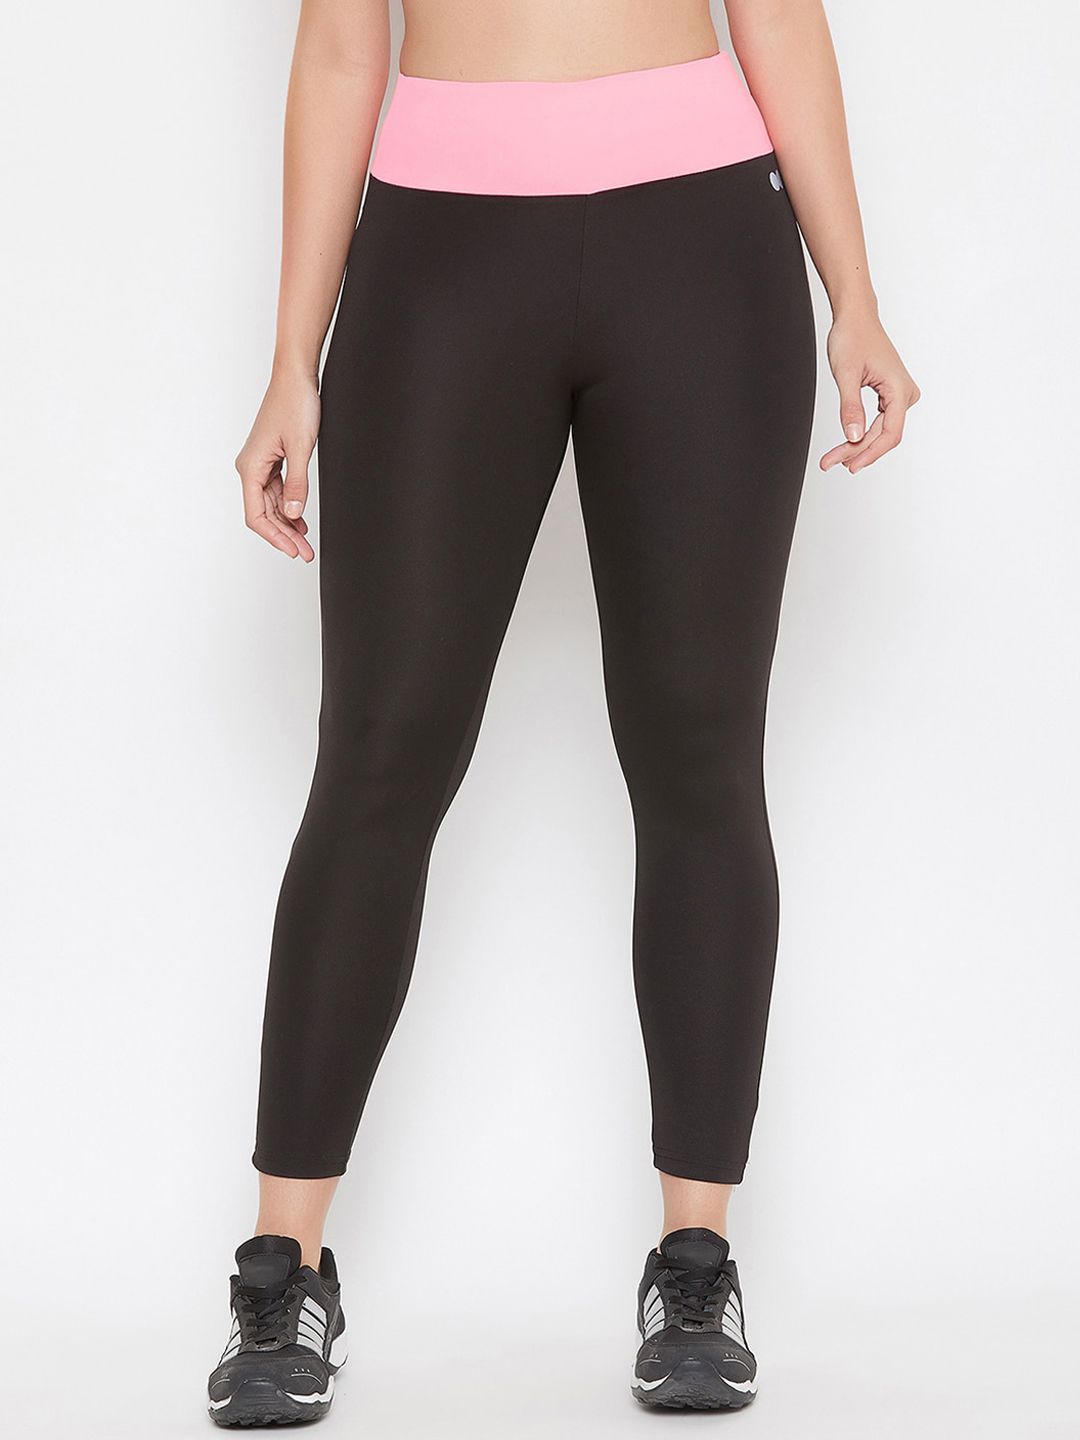 Clovia Women Black & Pink Solid Ankle-Length Tights Price in India